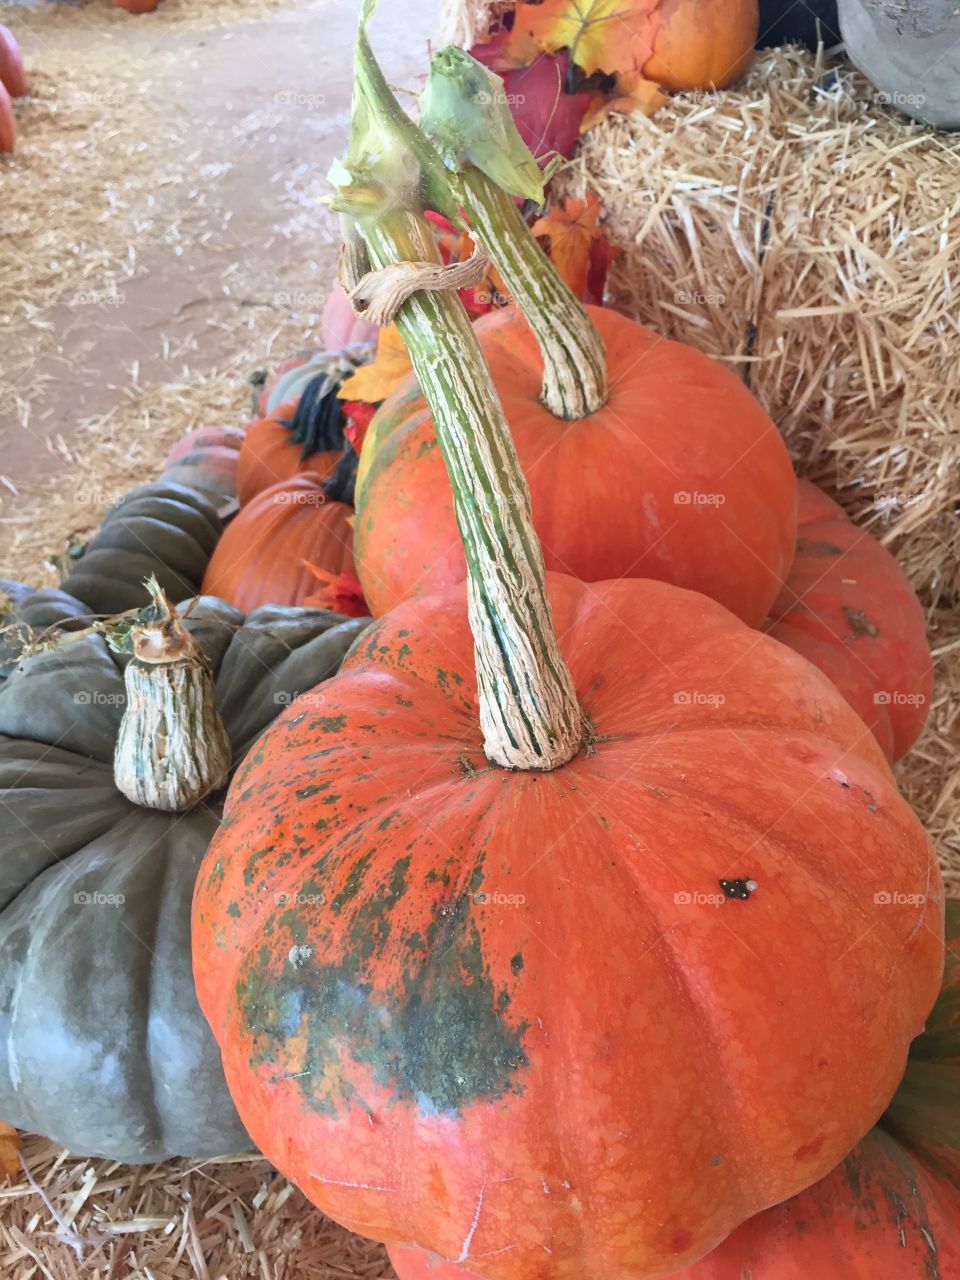 Pumpkins at the pumpkin farm in fall with hay 